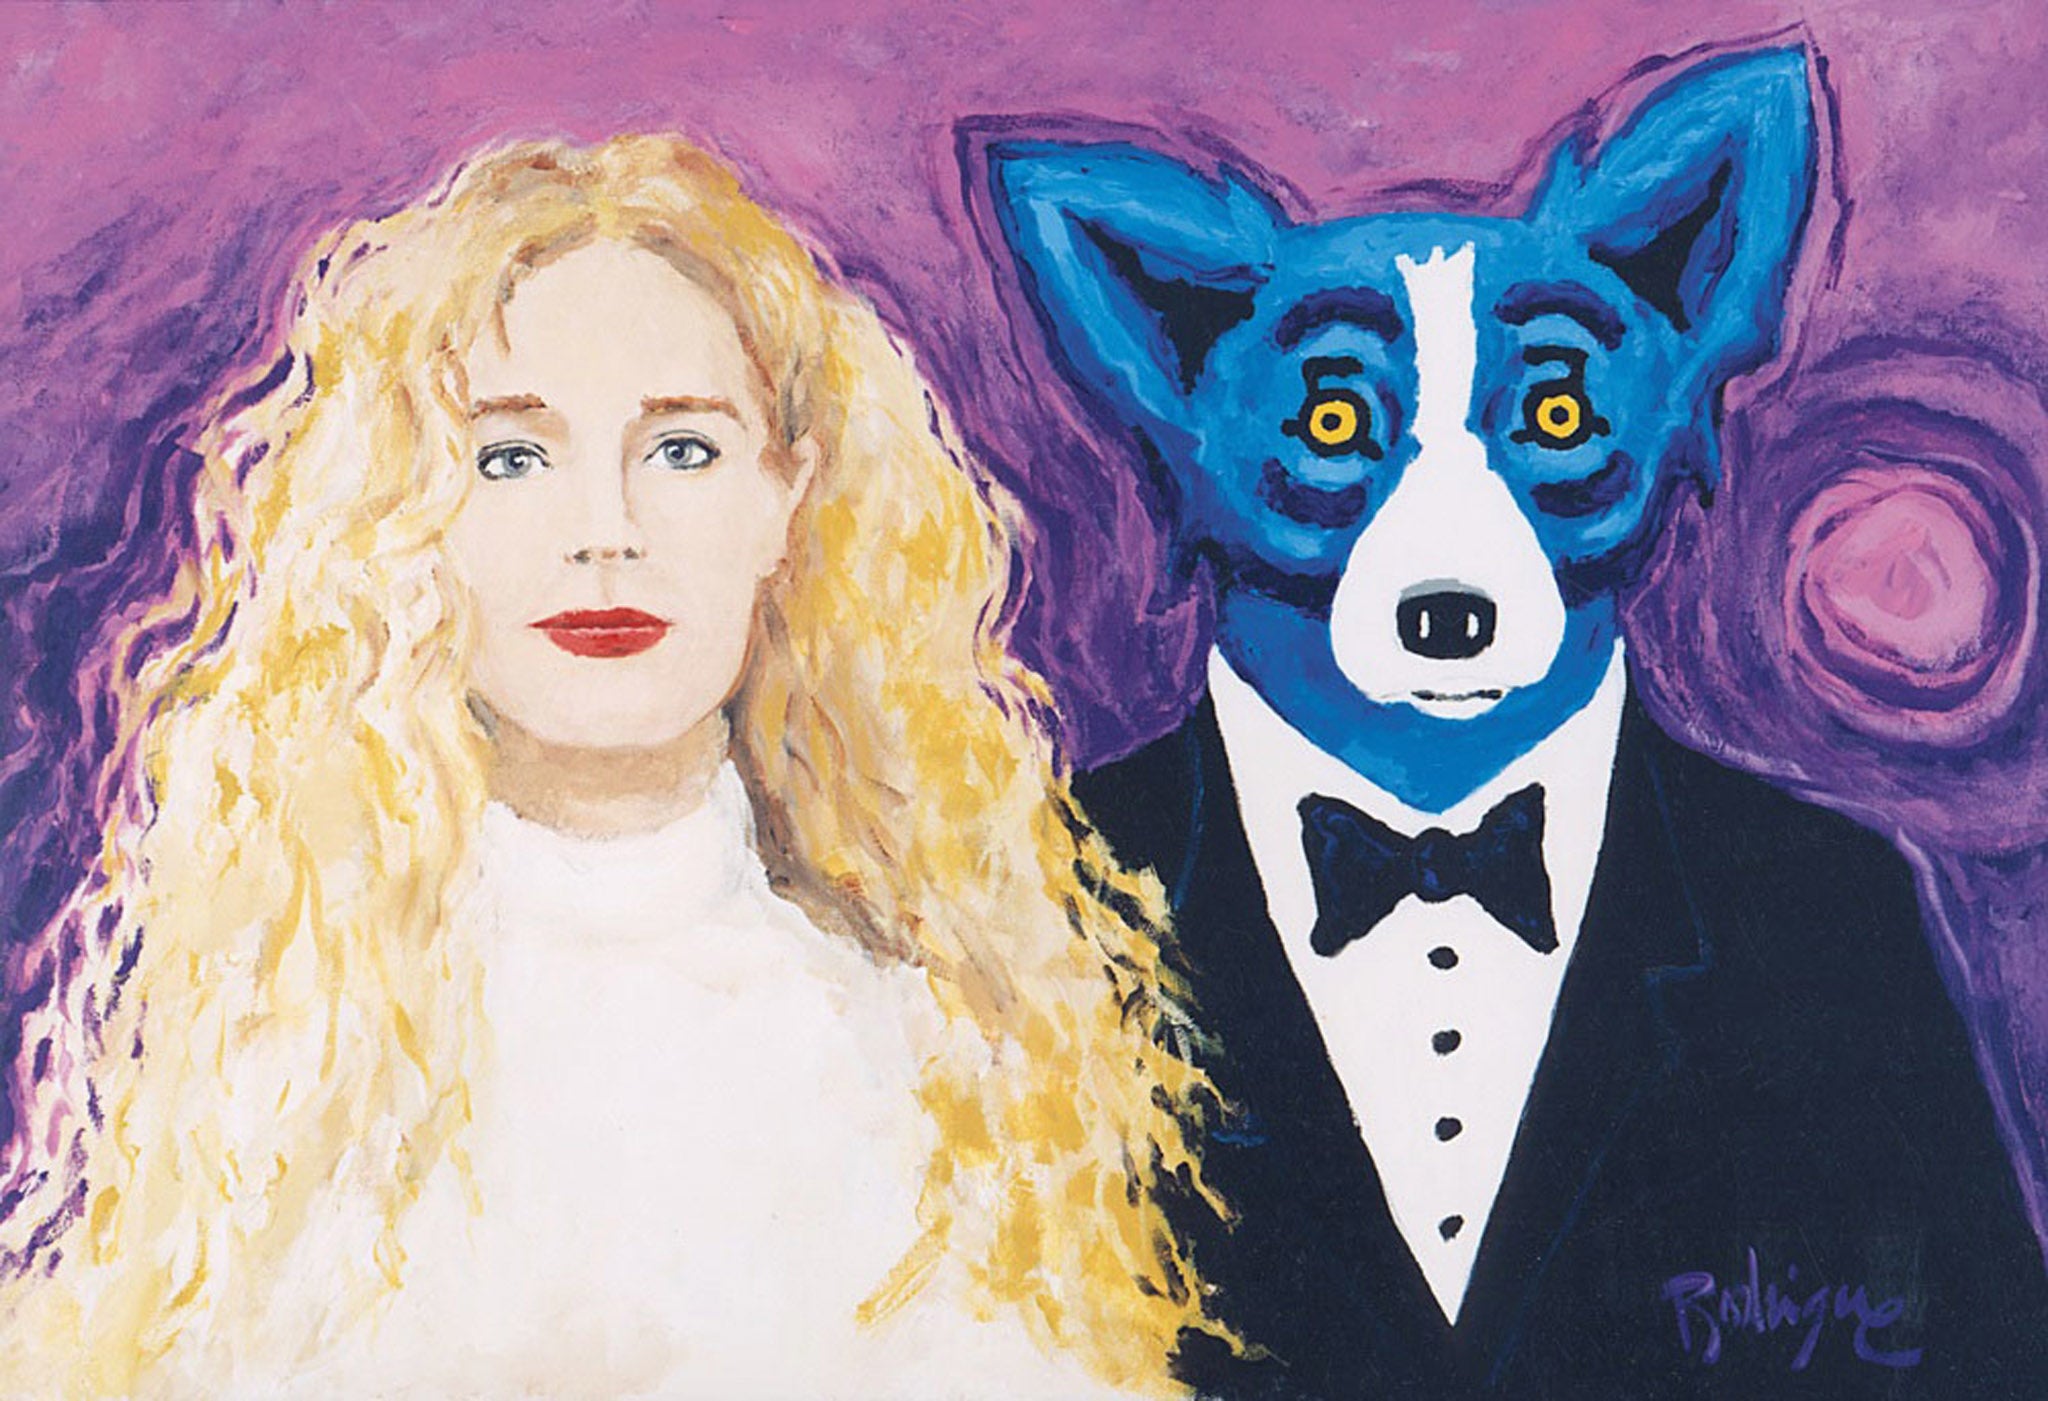 Wendy and Me by George Rodrigue was stolen on Monday